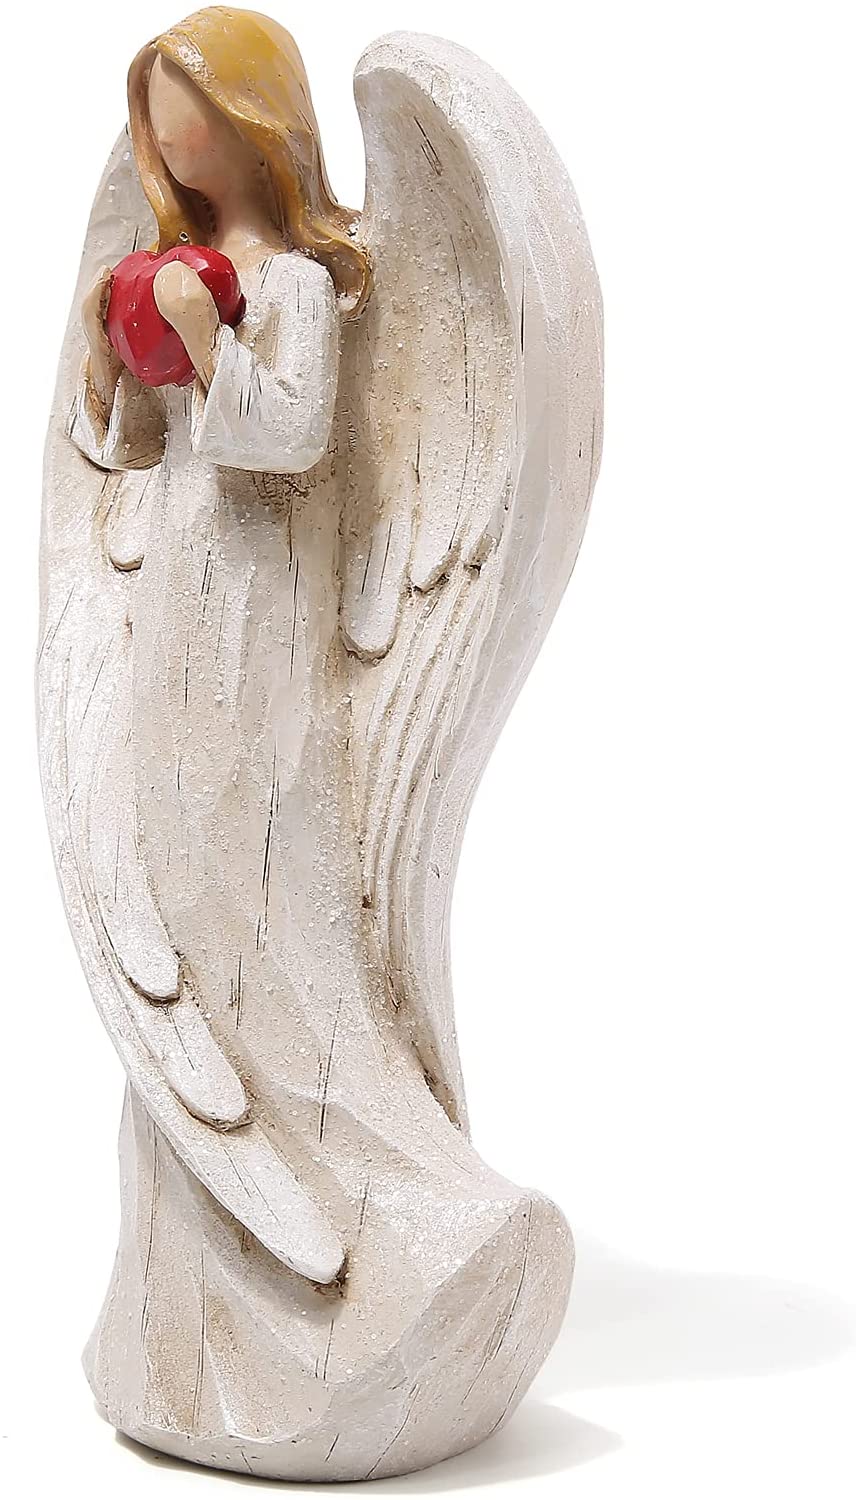 Hodao 9 inch Resin Praying Angel Figurine for Gifts Home Decoration(with heart)